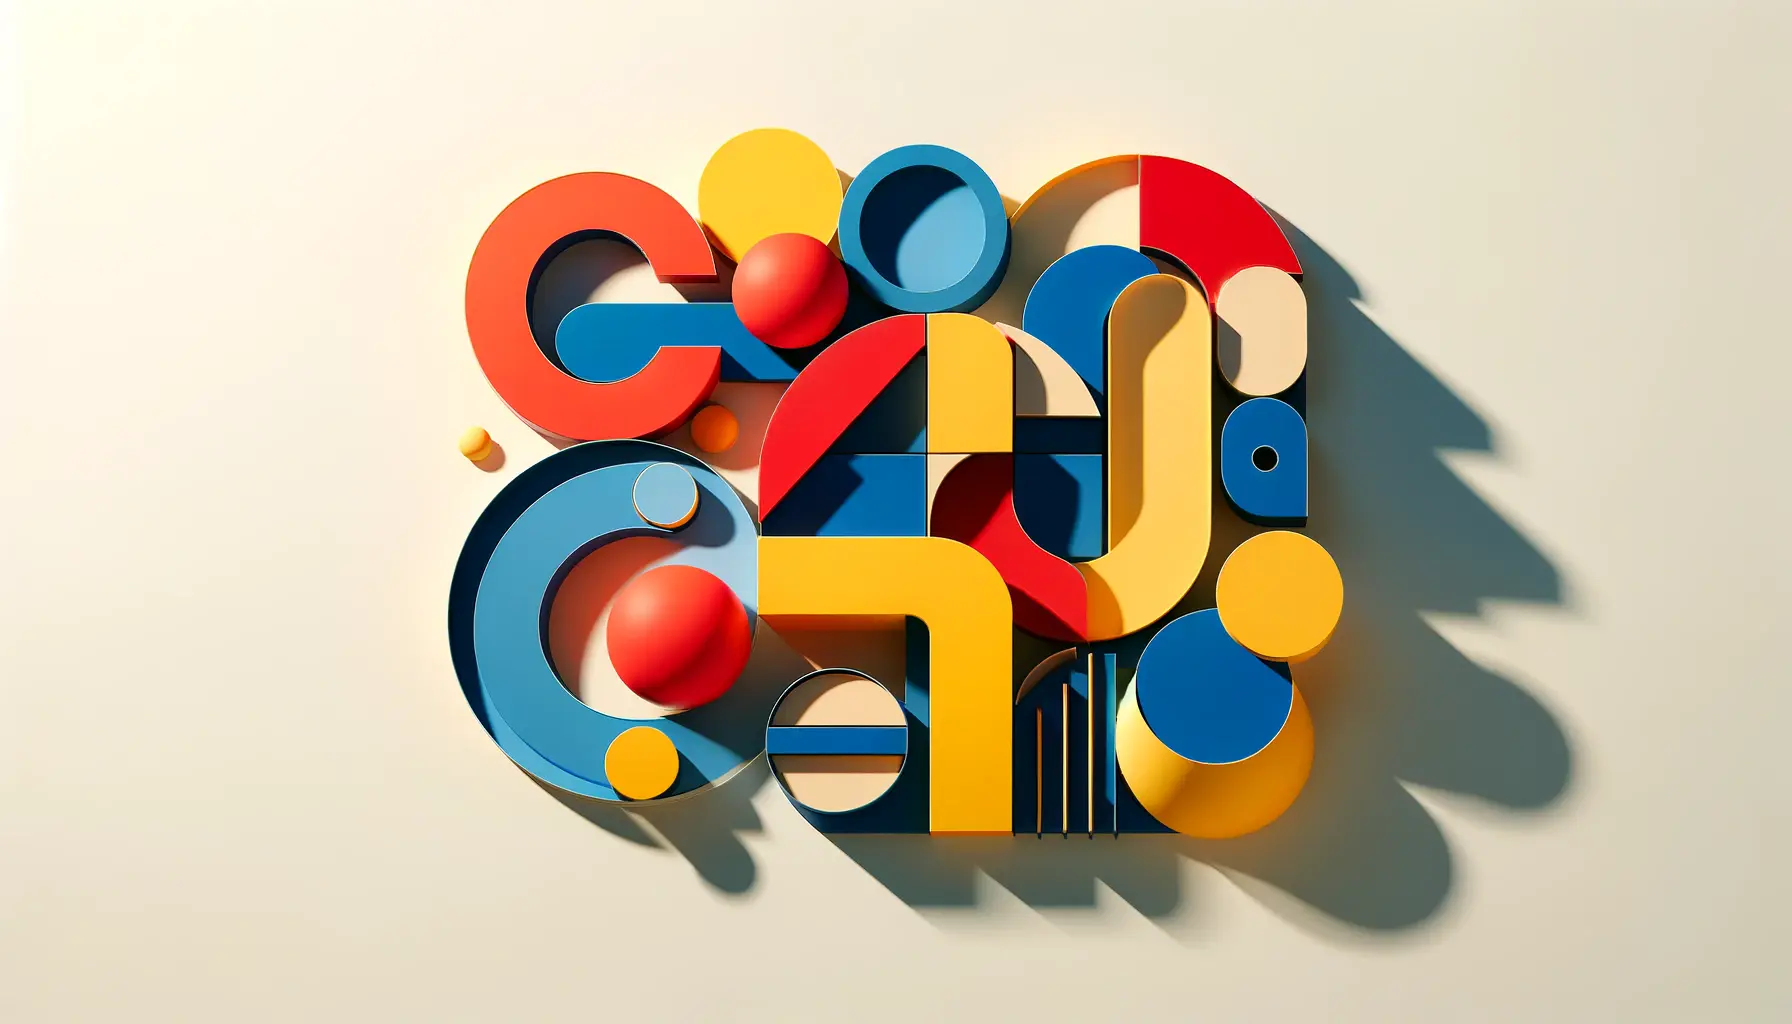 Enhancing Brand Identity with Distinctive Letter Shapes